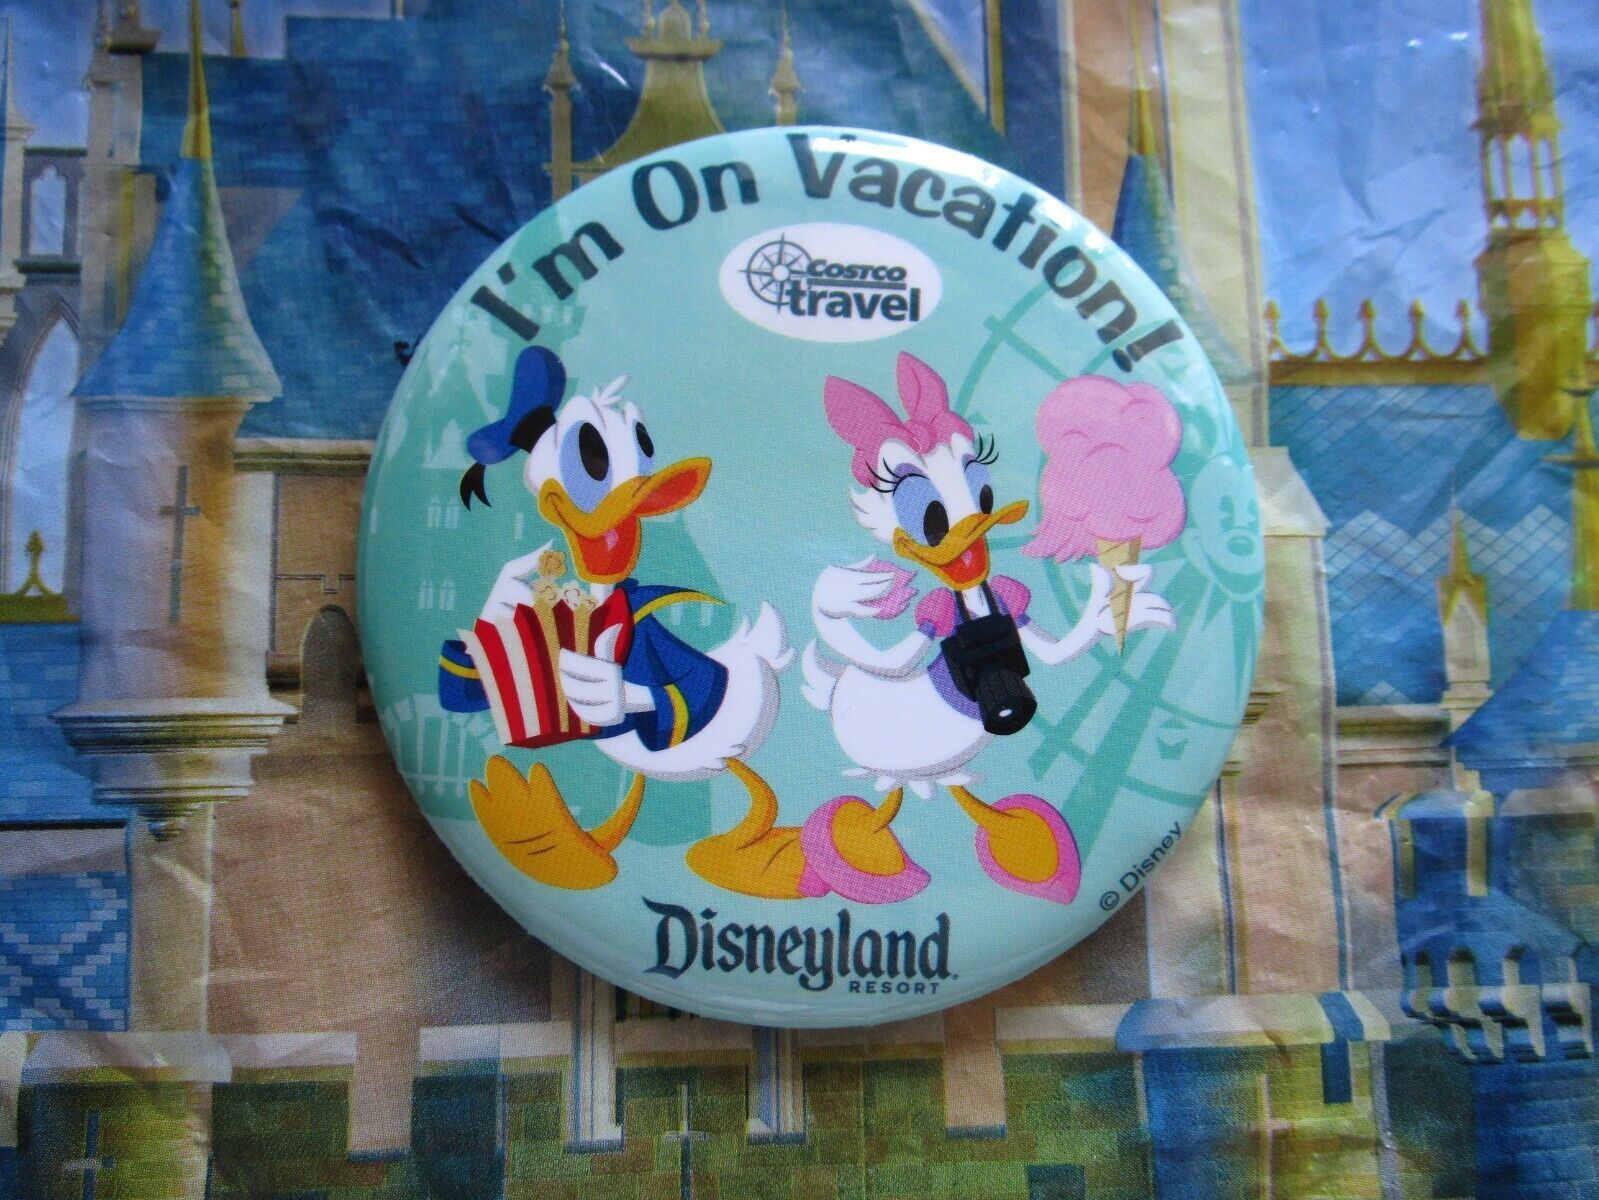 Primary image for Disneyland Donald and Daisy I'm On Vacation Pin Button Costco Travel Exclusive